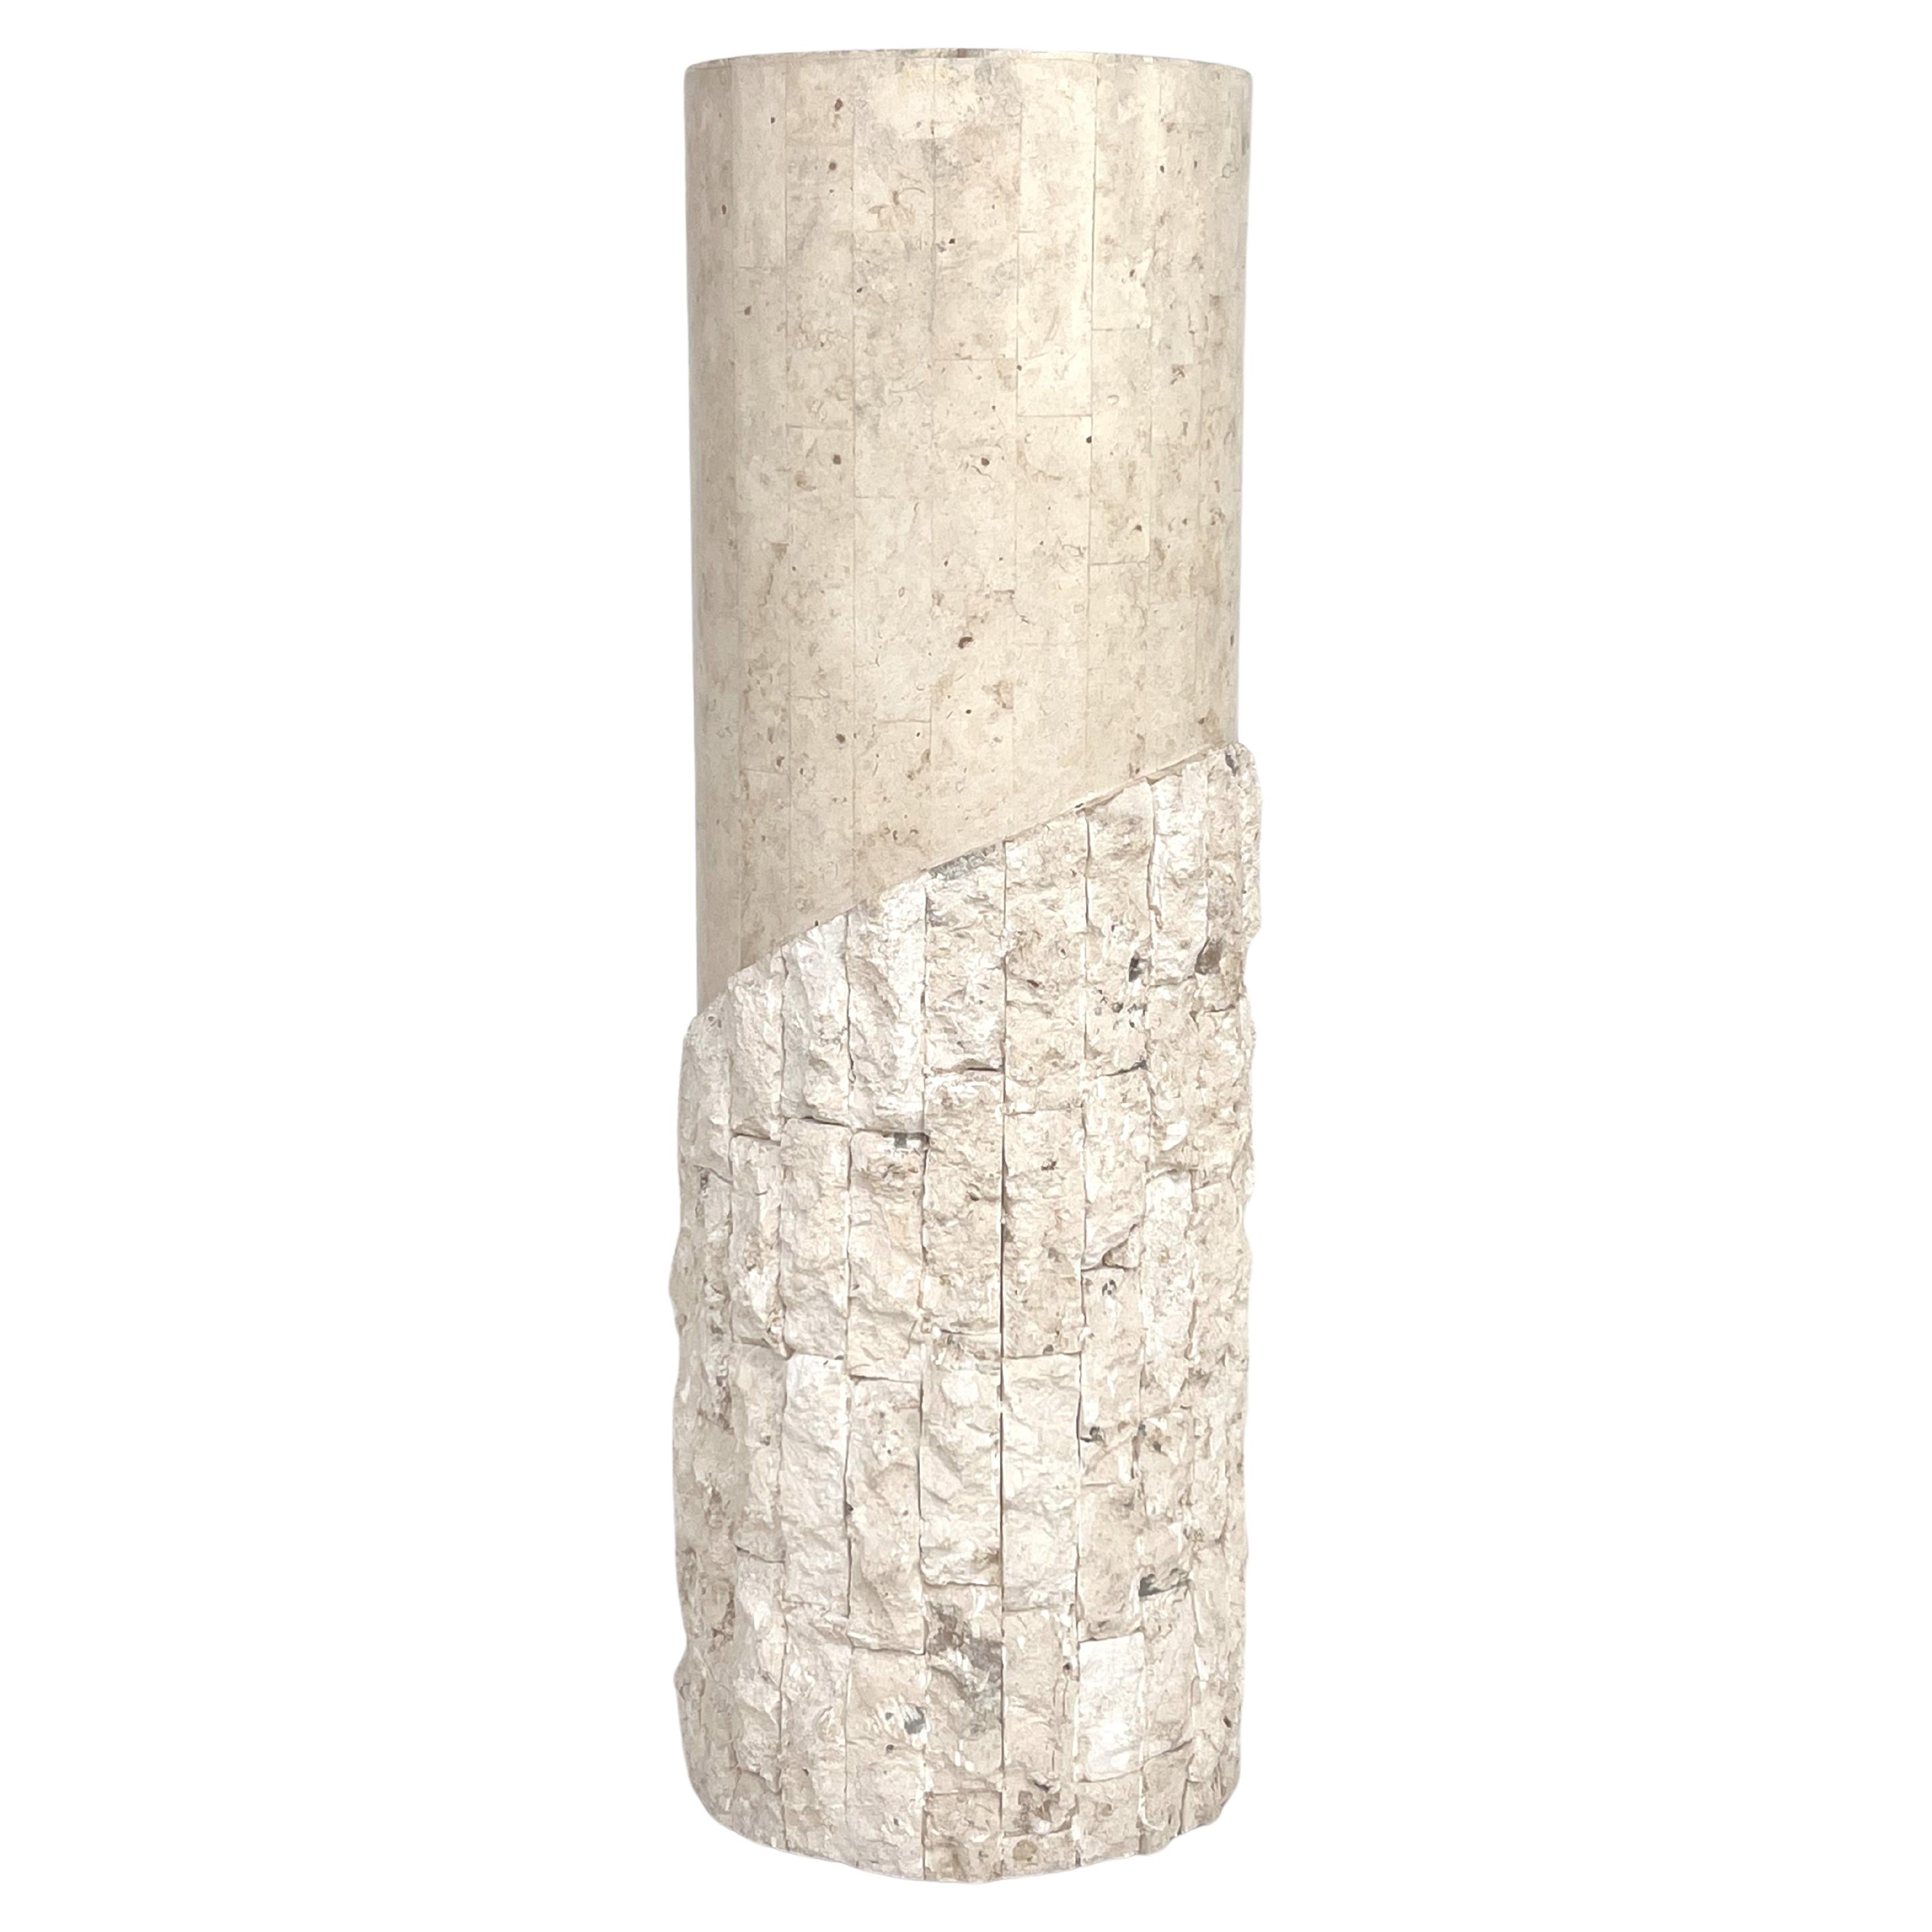 Tessellated Stone Cylindrical Shaped Pedestal Column Table For Sale